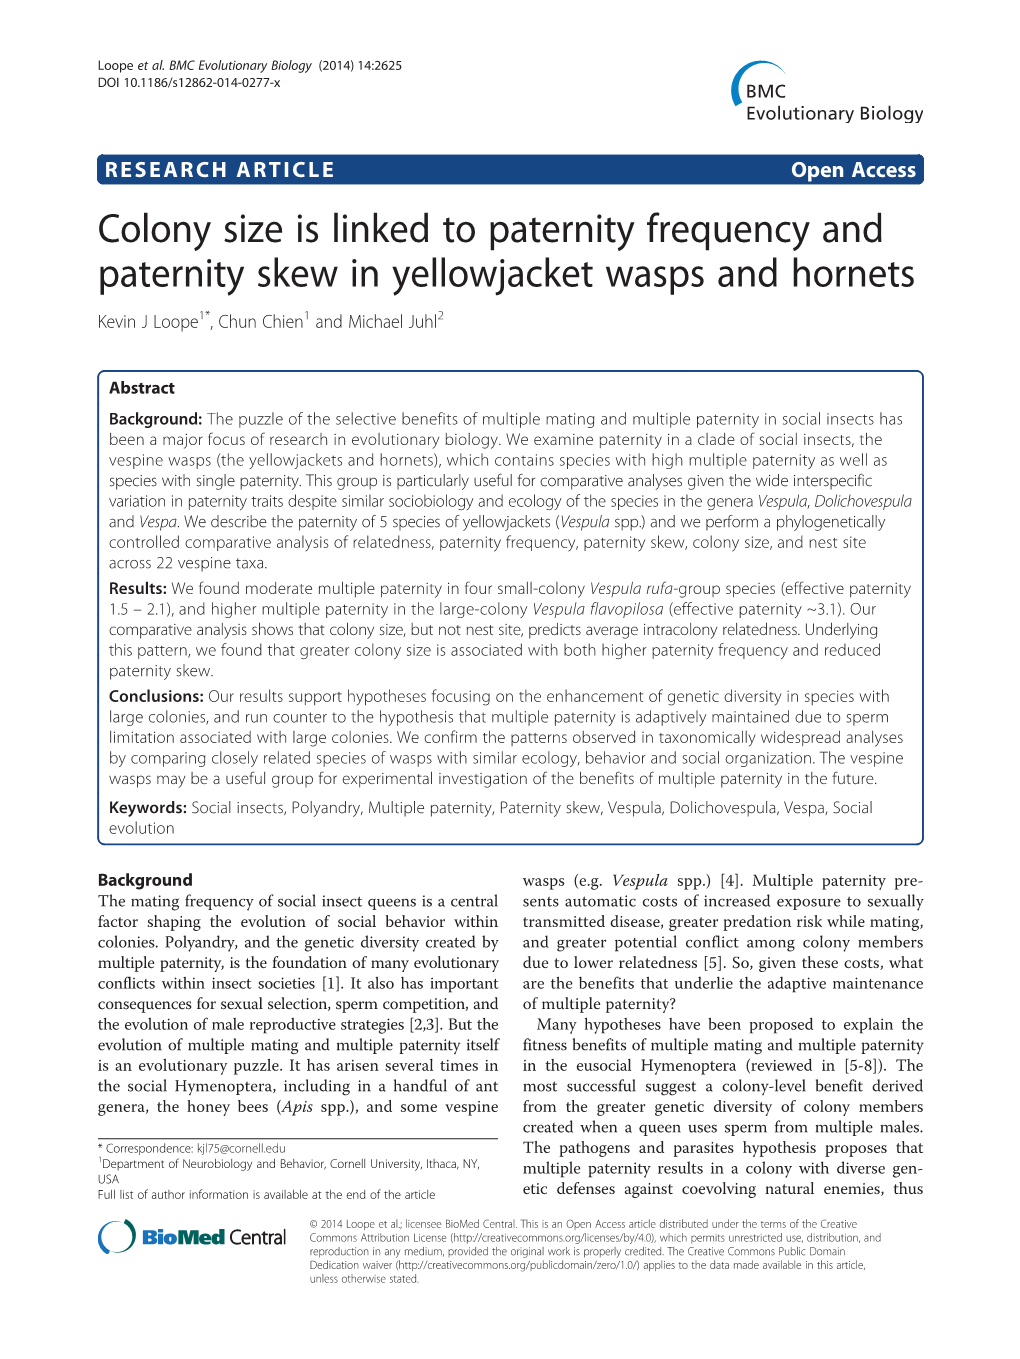 Colony Size Is Linked to Paternity Frequency and Paternity Skew in Yellowjacket Wasps and Hornets Kevin J Loope1*, Chun Chien1 and Michael Juhl2